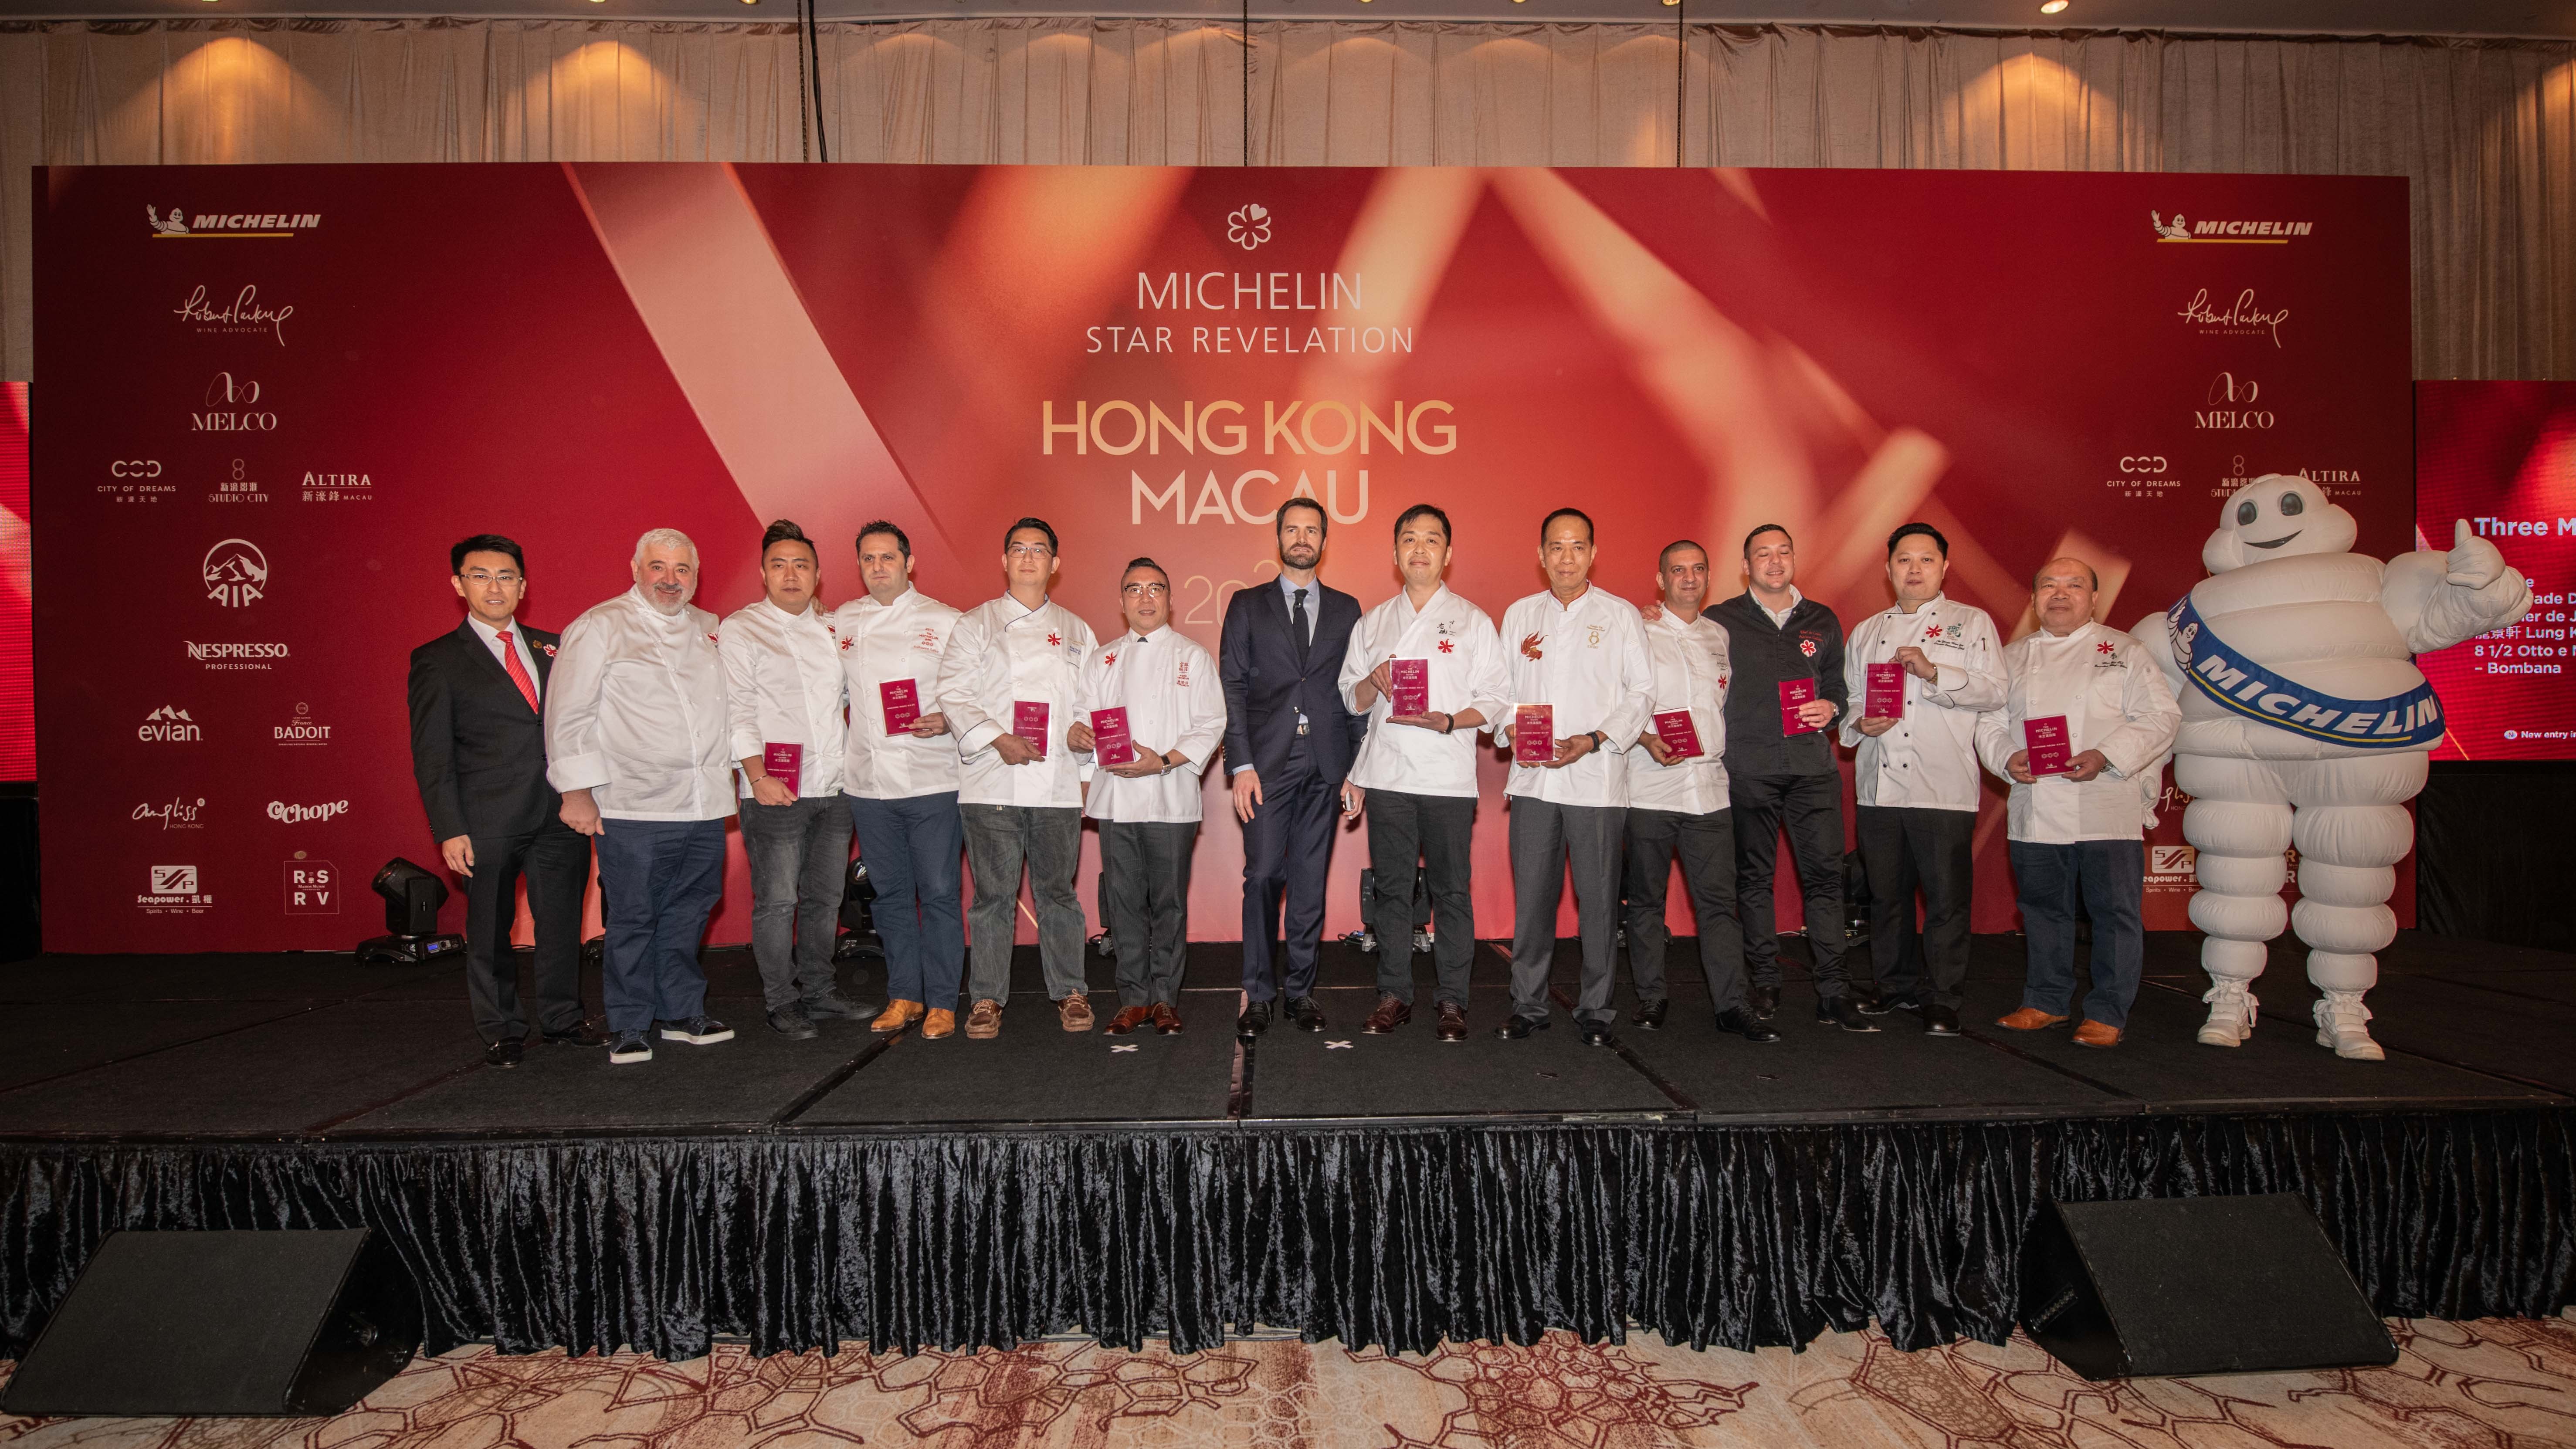 Michelin Guide Hong Kong and Macau 2020 awarded new restaurants with Michelin stars and took some stars away. Photo: Handout